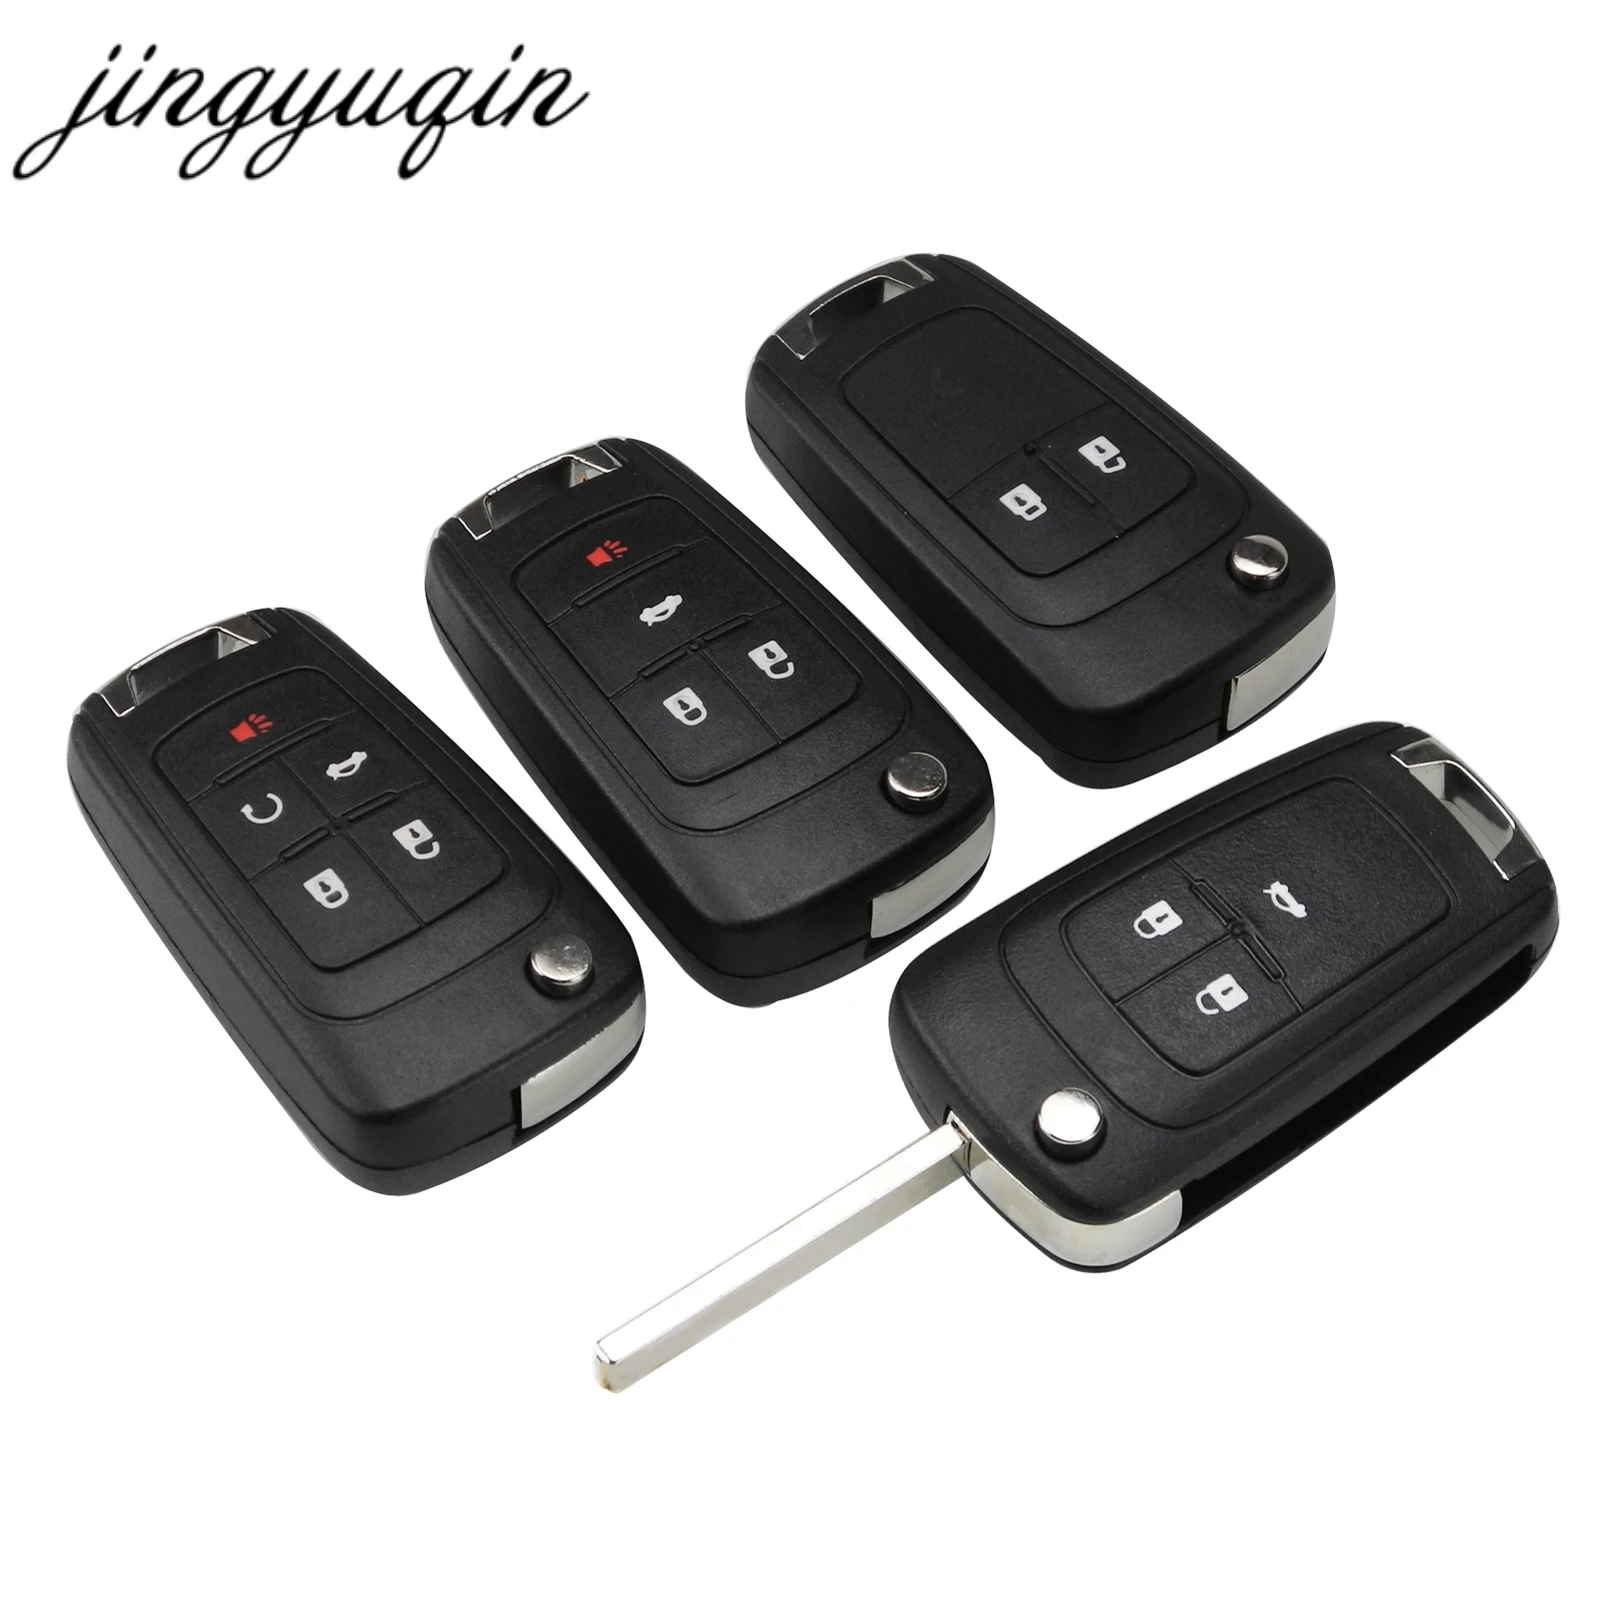 jingyuqin 2/3/4/5 Buttons Folding Key Shell Blank For Chevrolet Lova Sail Aveo Cruze Replacement Flip Remote Key Case Fob Cover